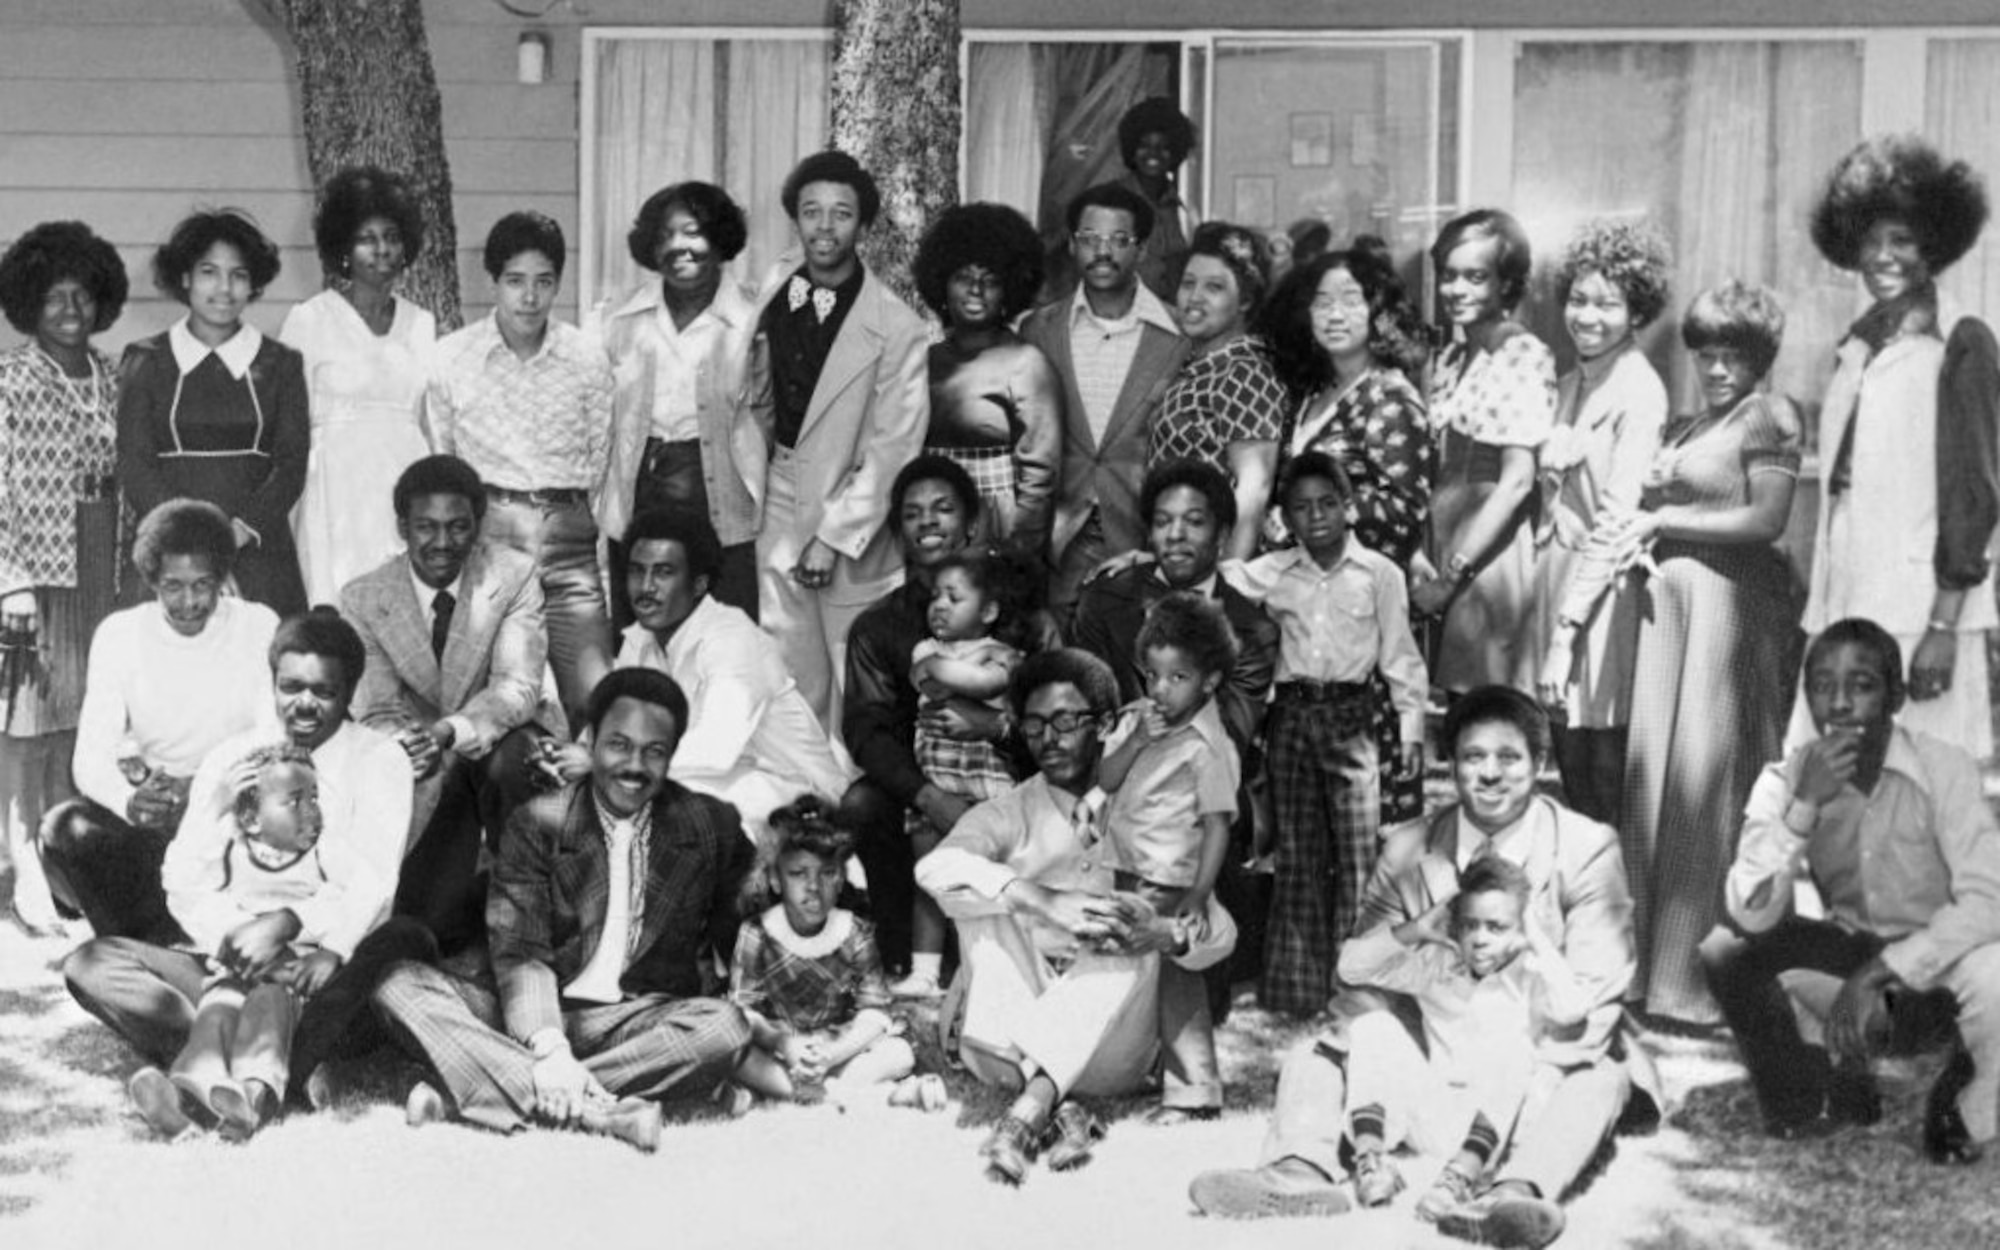 A black-and-white of more than 30 people posing for a group in a backyard in 1974.